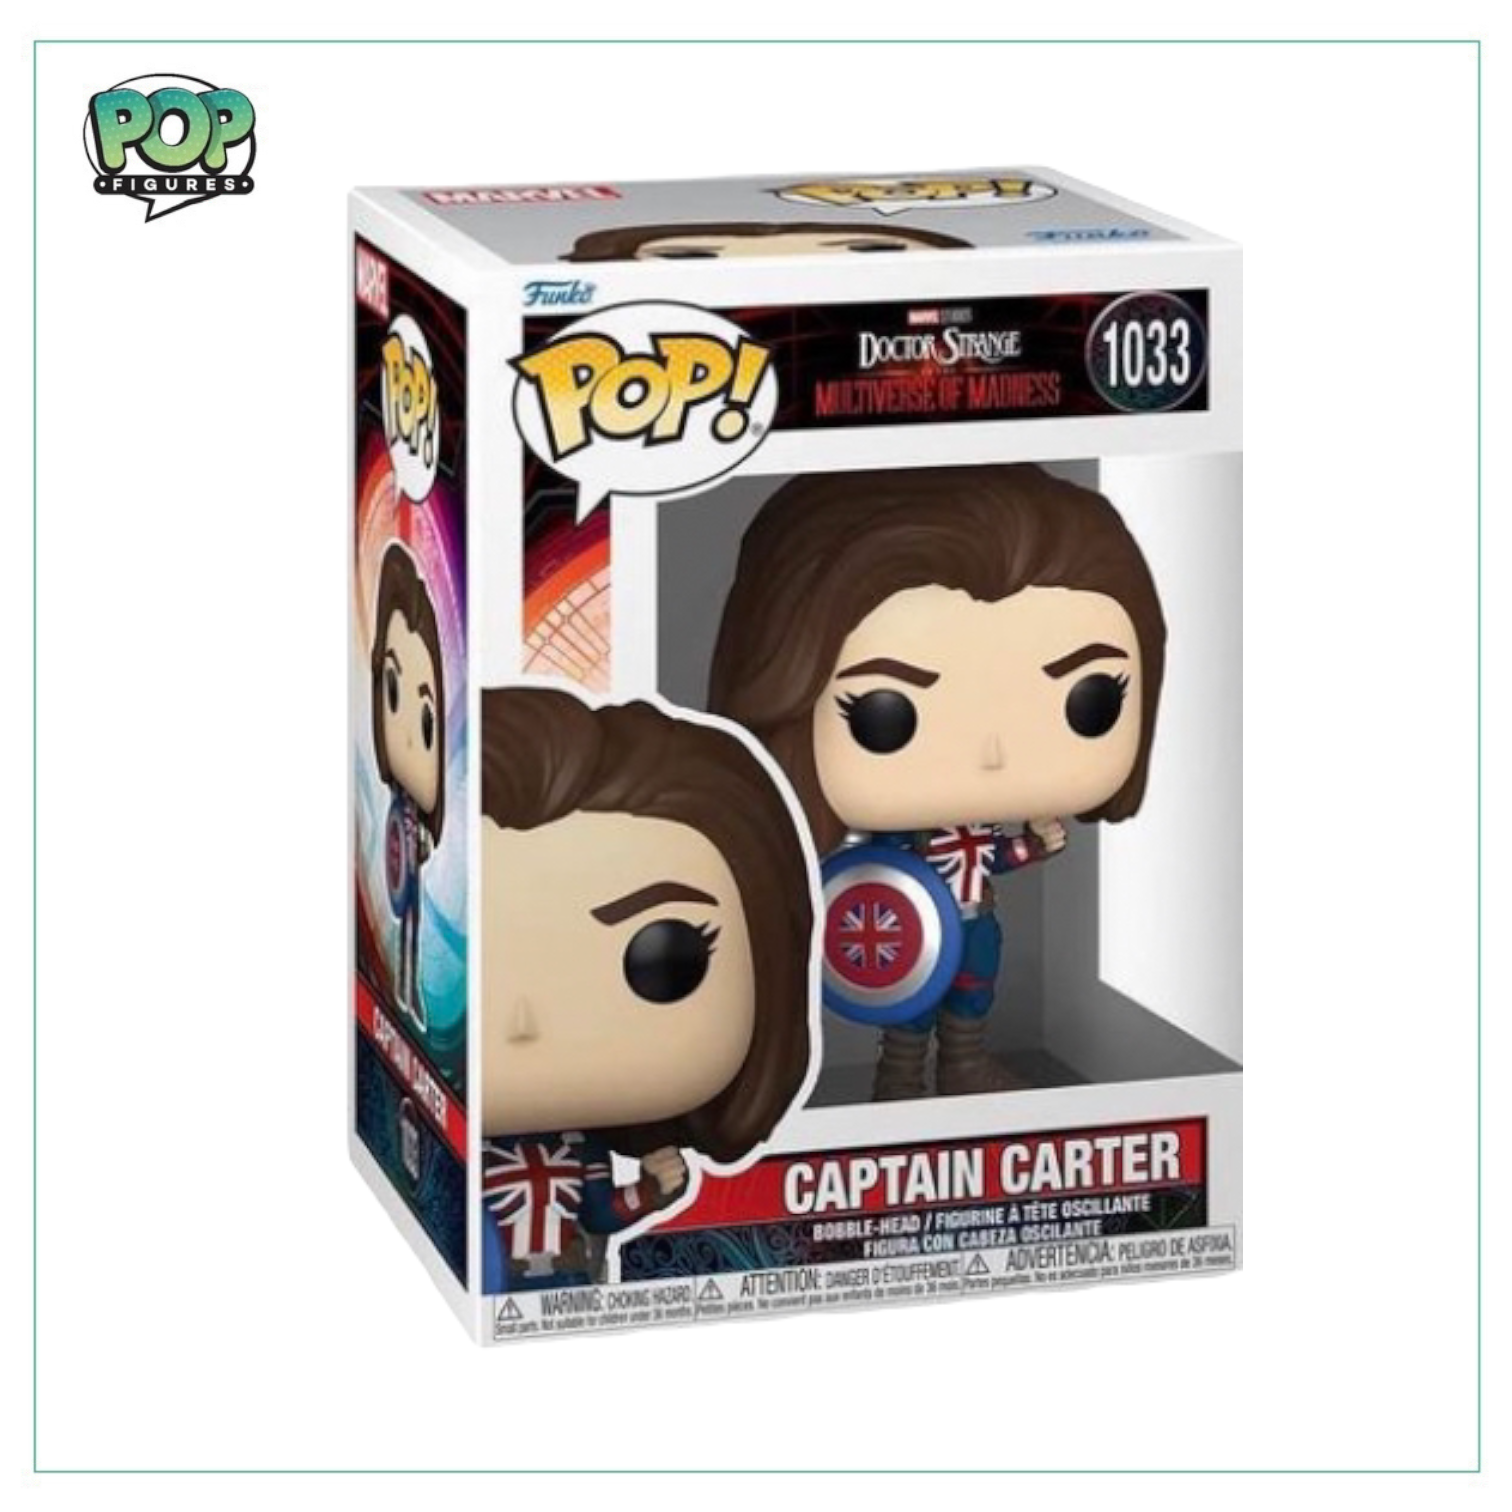 Captain Carter #1033 Funko Pop! Dr. Strange and the Multiverse of Madness